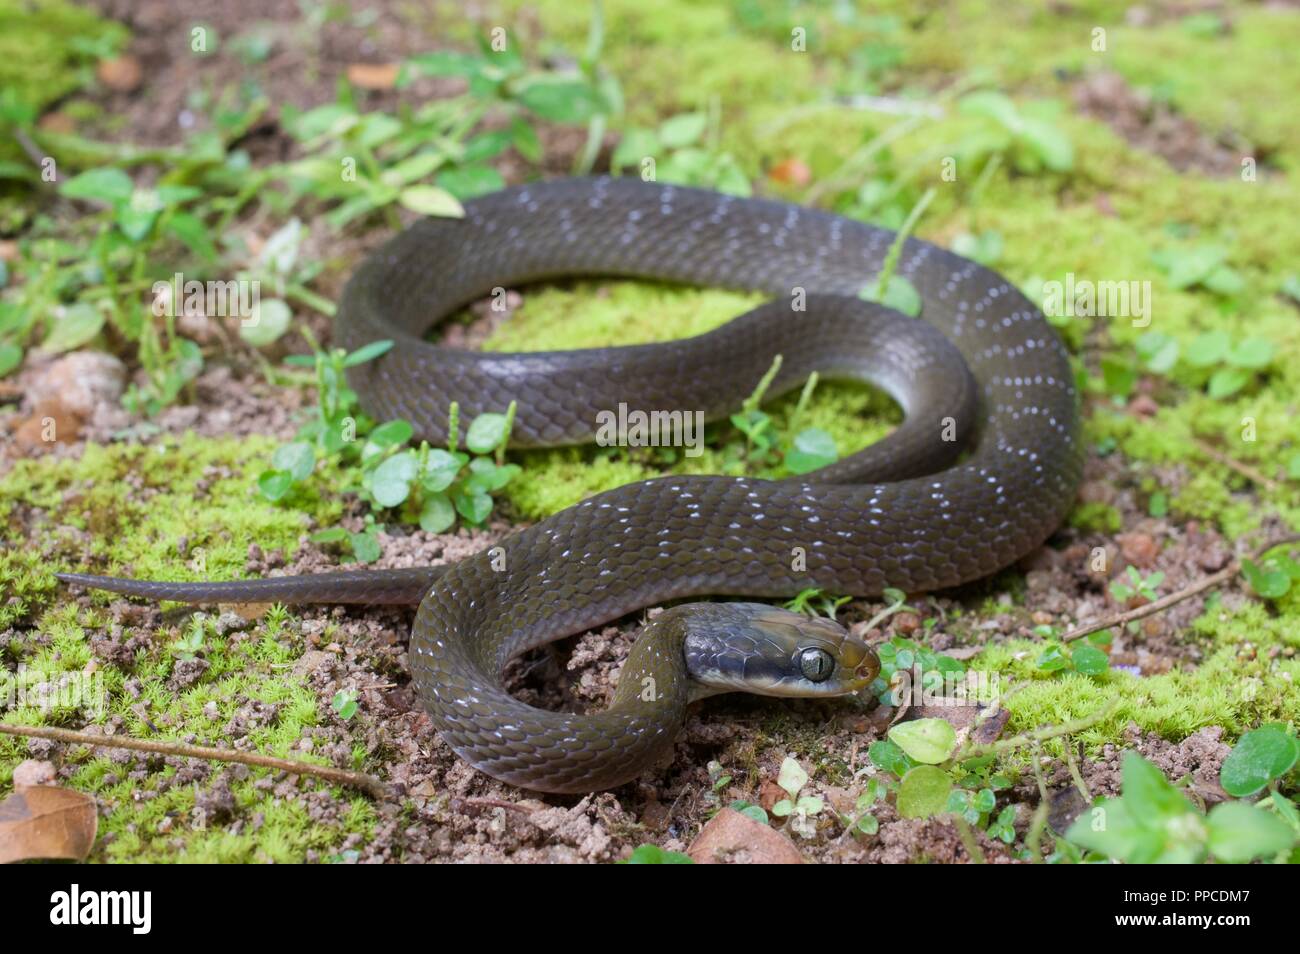 A White-lipped Herald Snake (Crotaphopeltis hotamboeia) coiled on mossy ground in Bobiri Forest Reserve, Ghana, West Africa Stock Photo